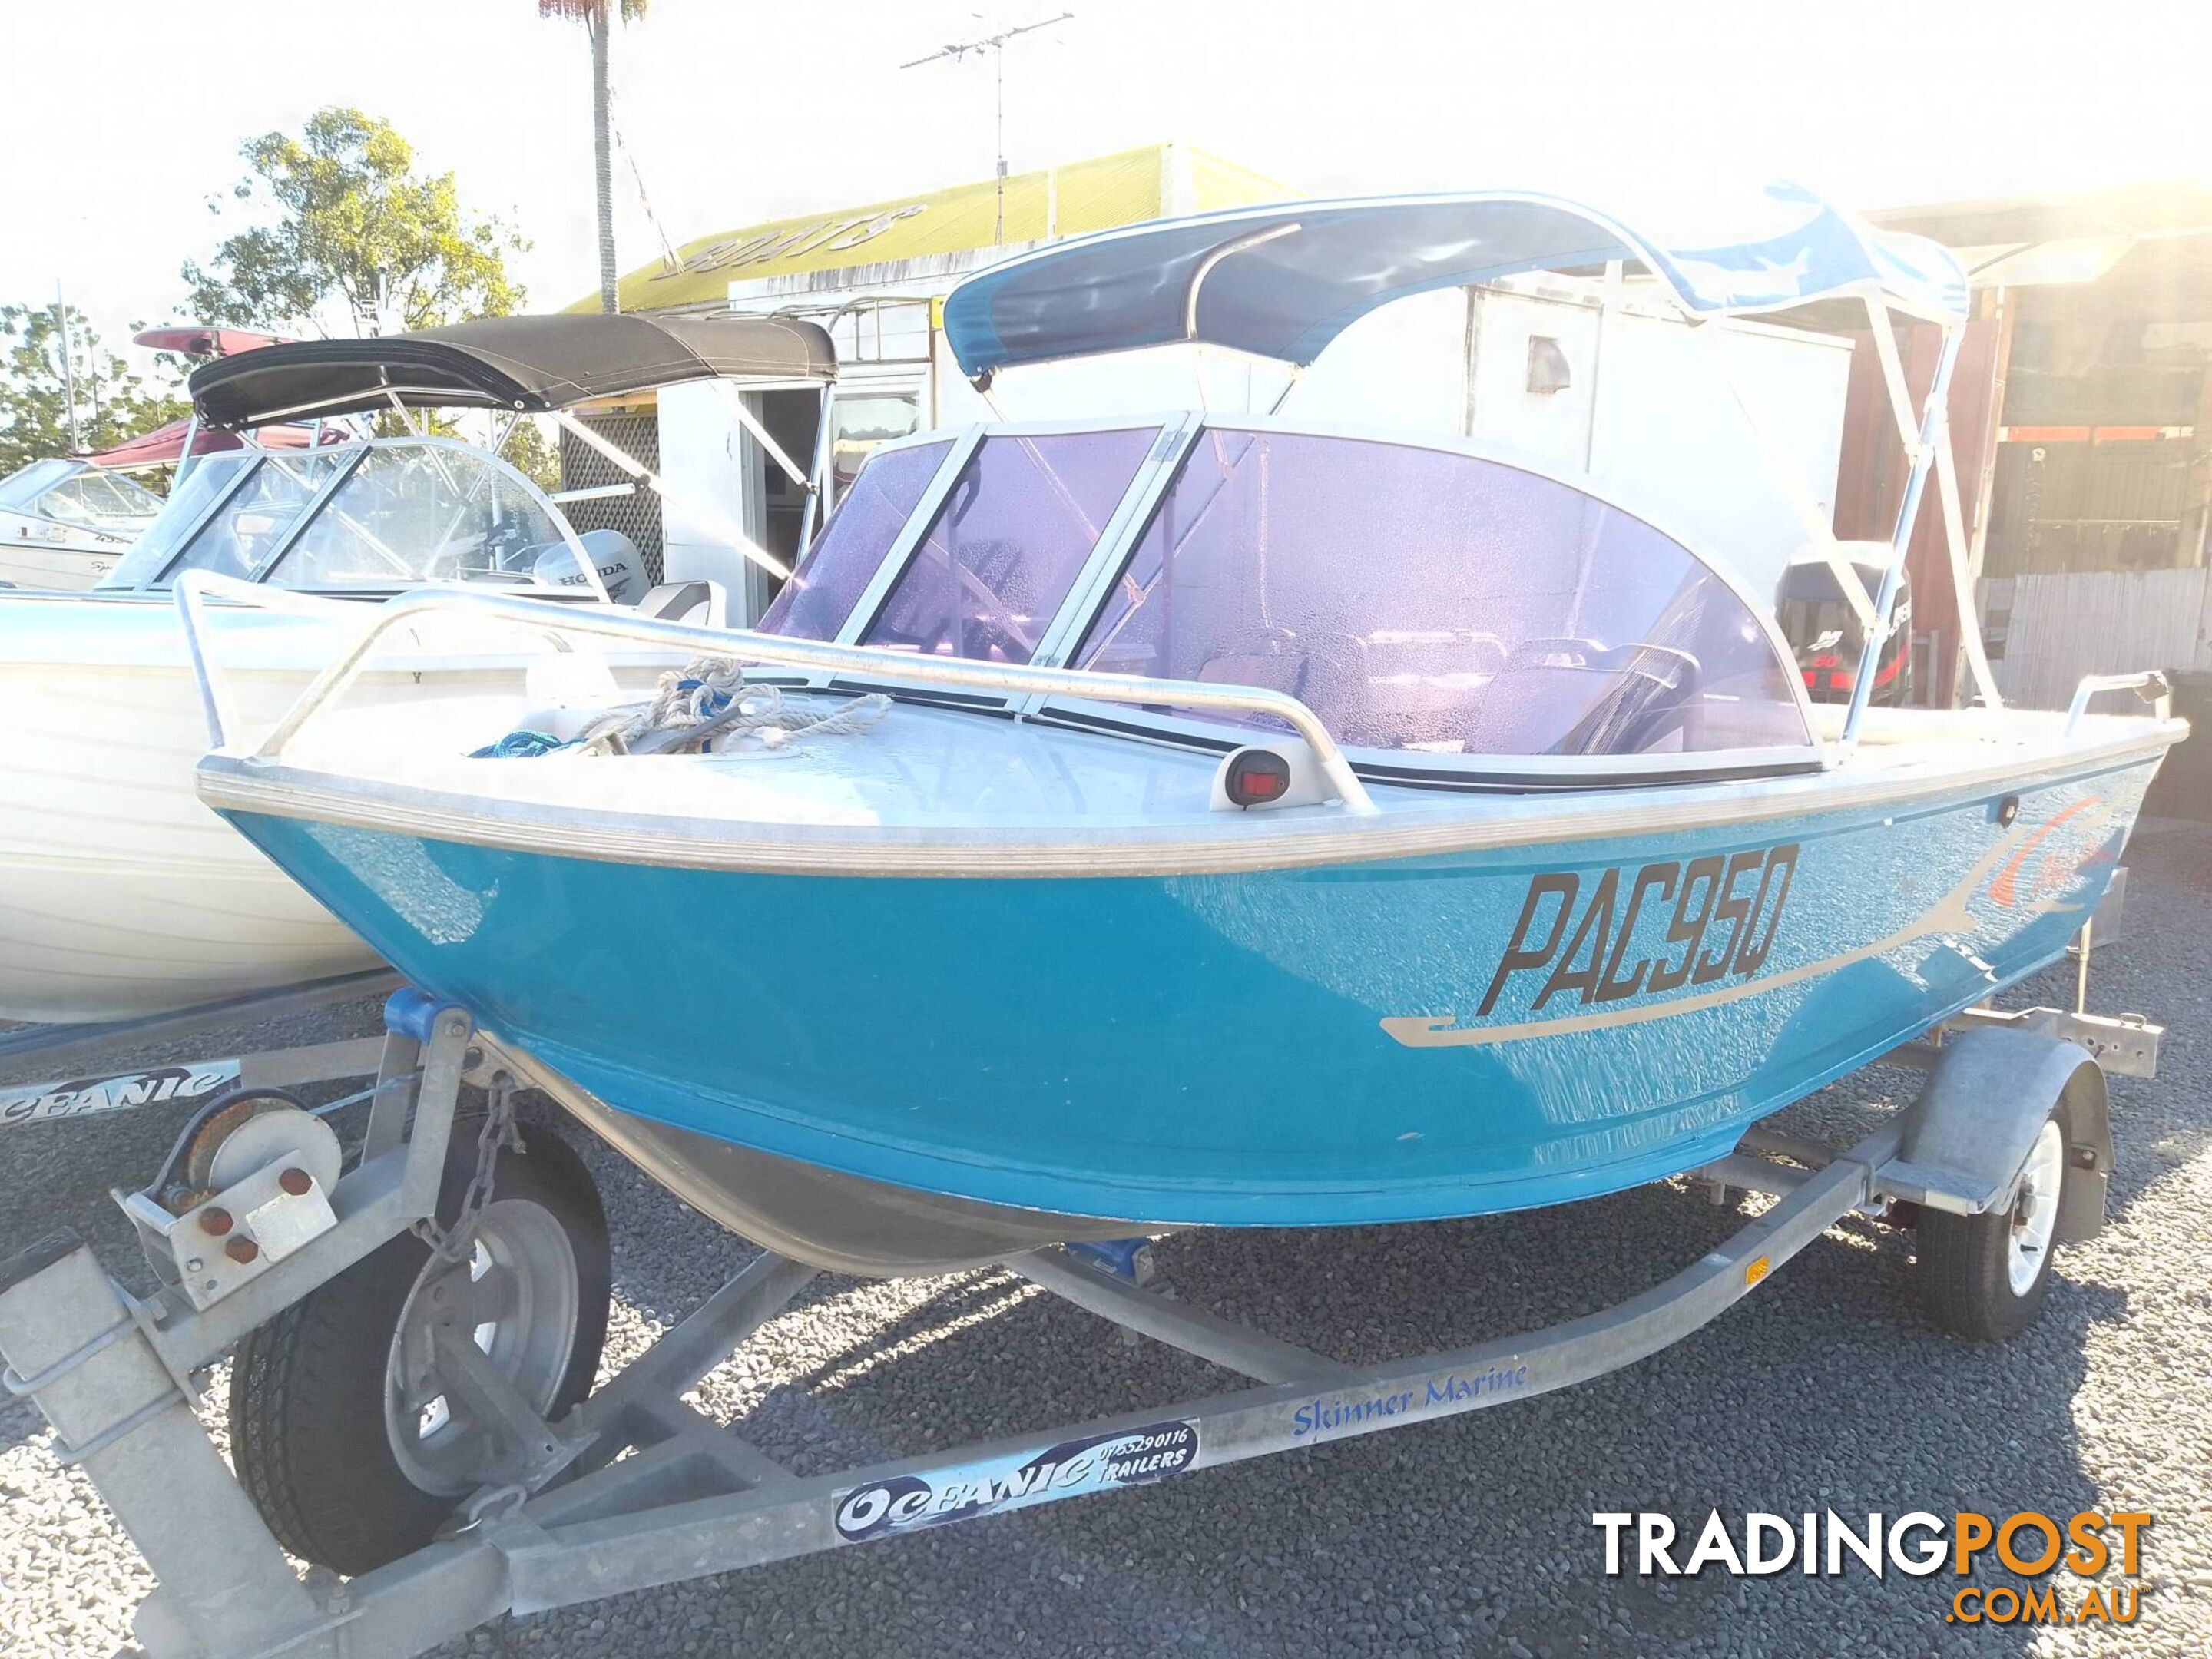 BLUE FIN DISCOVERY 4.2M RUNABOUT - 50HP MERCURY 4 STROKE AND TRAILER